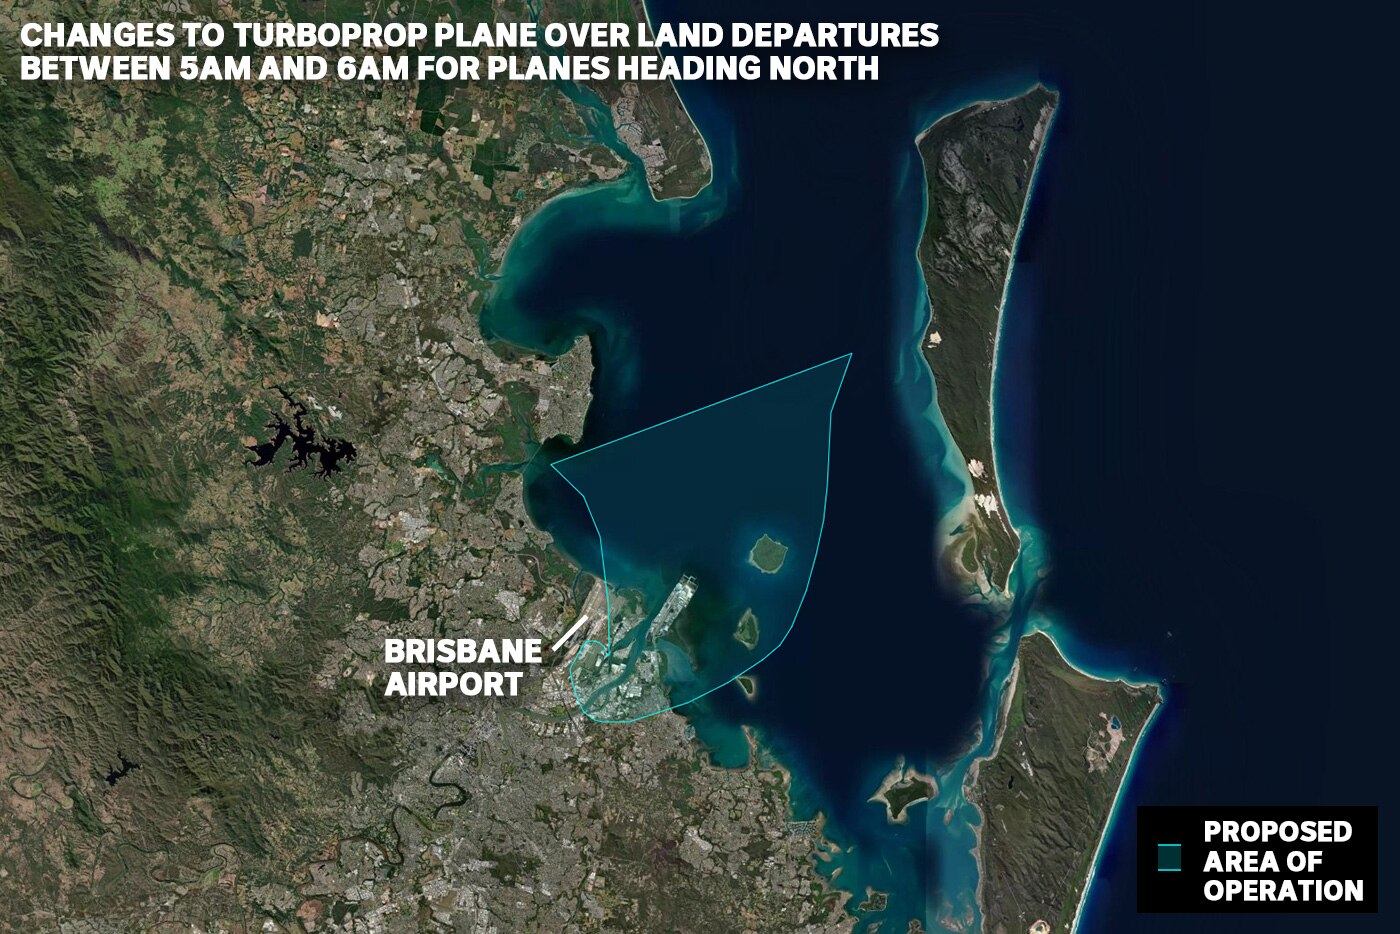 Changes to turboprop plane over land departures between 5am and 6am for planes heading north